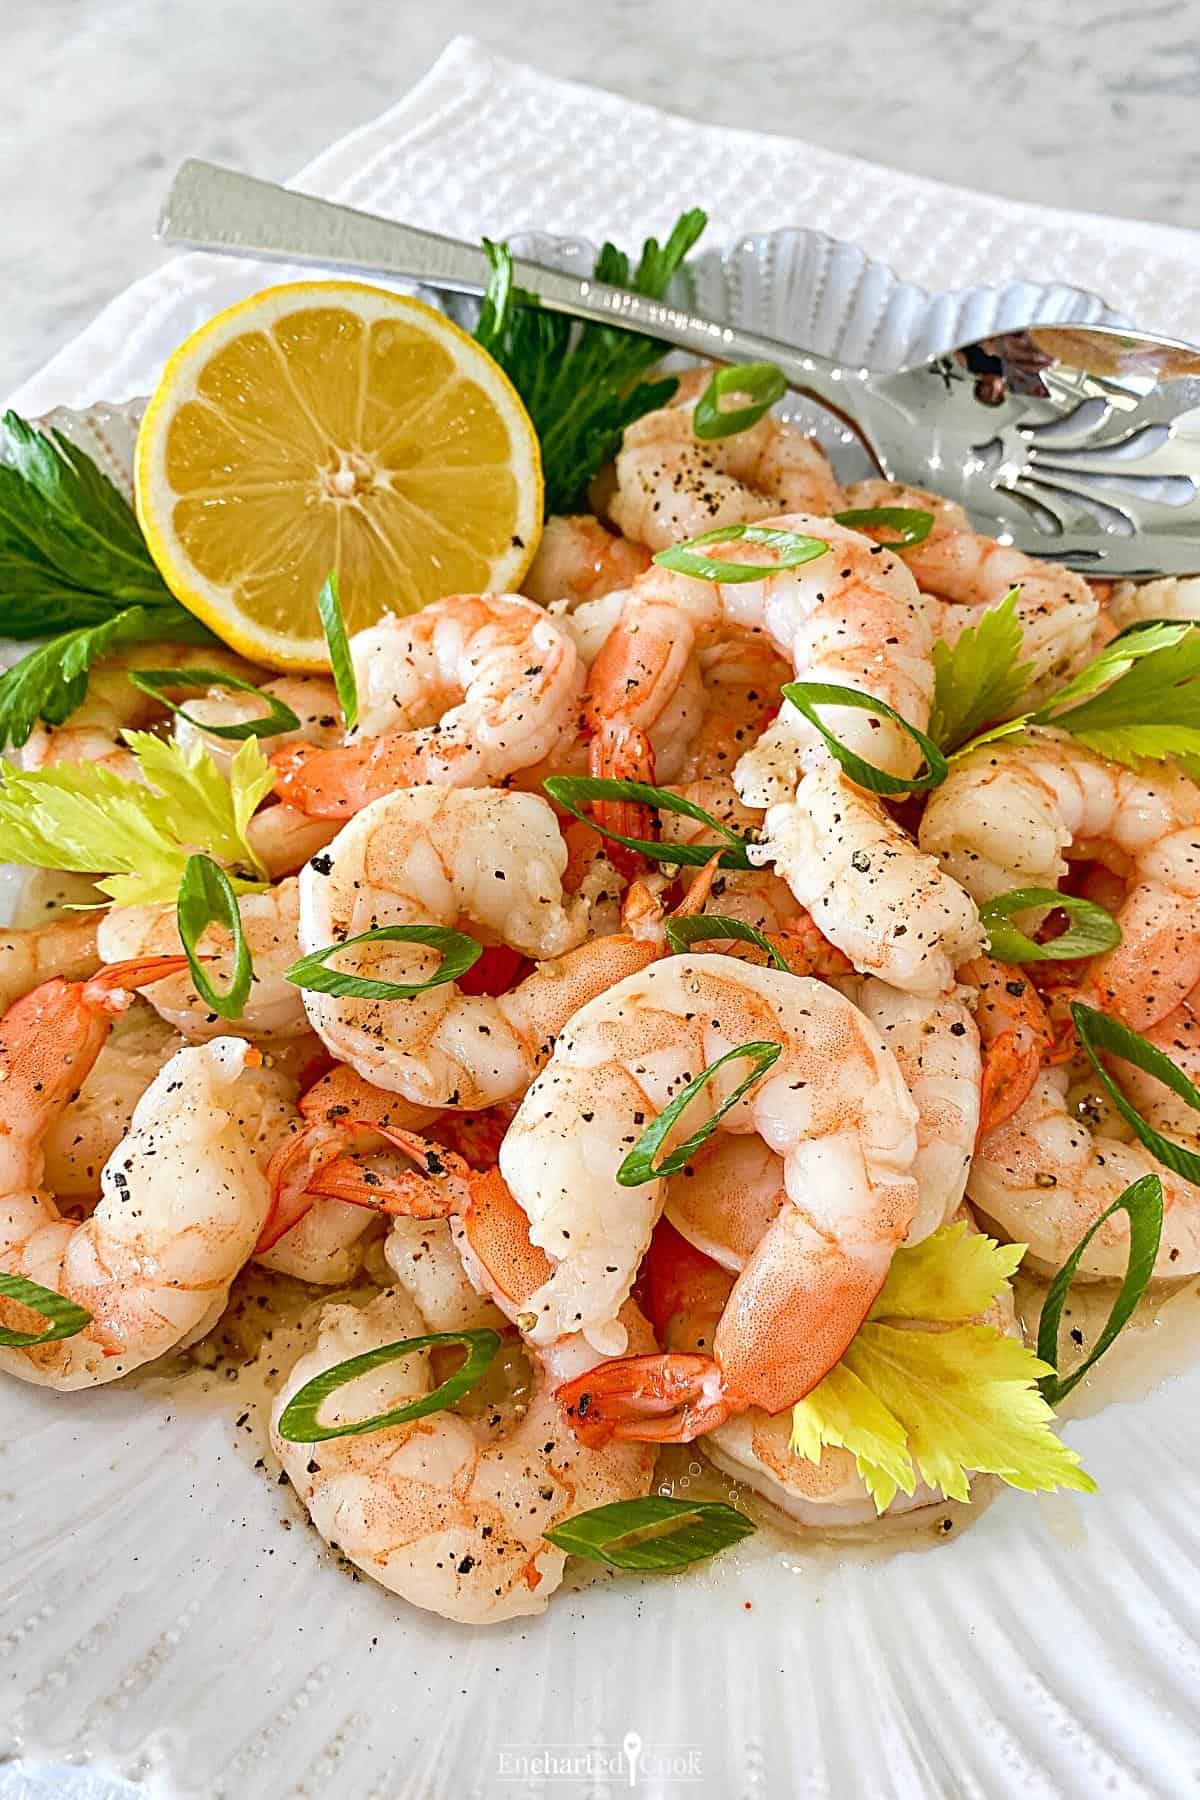 Vertical image of a plate of shrimp garnished with green onions, celery leaves, and a lemon half.